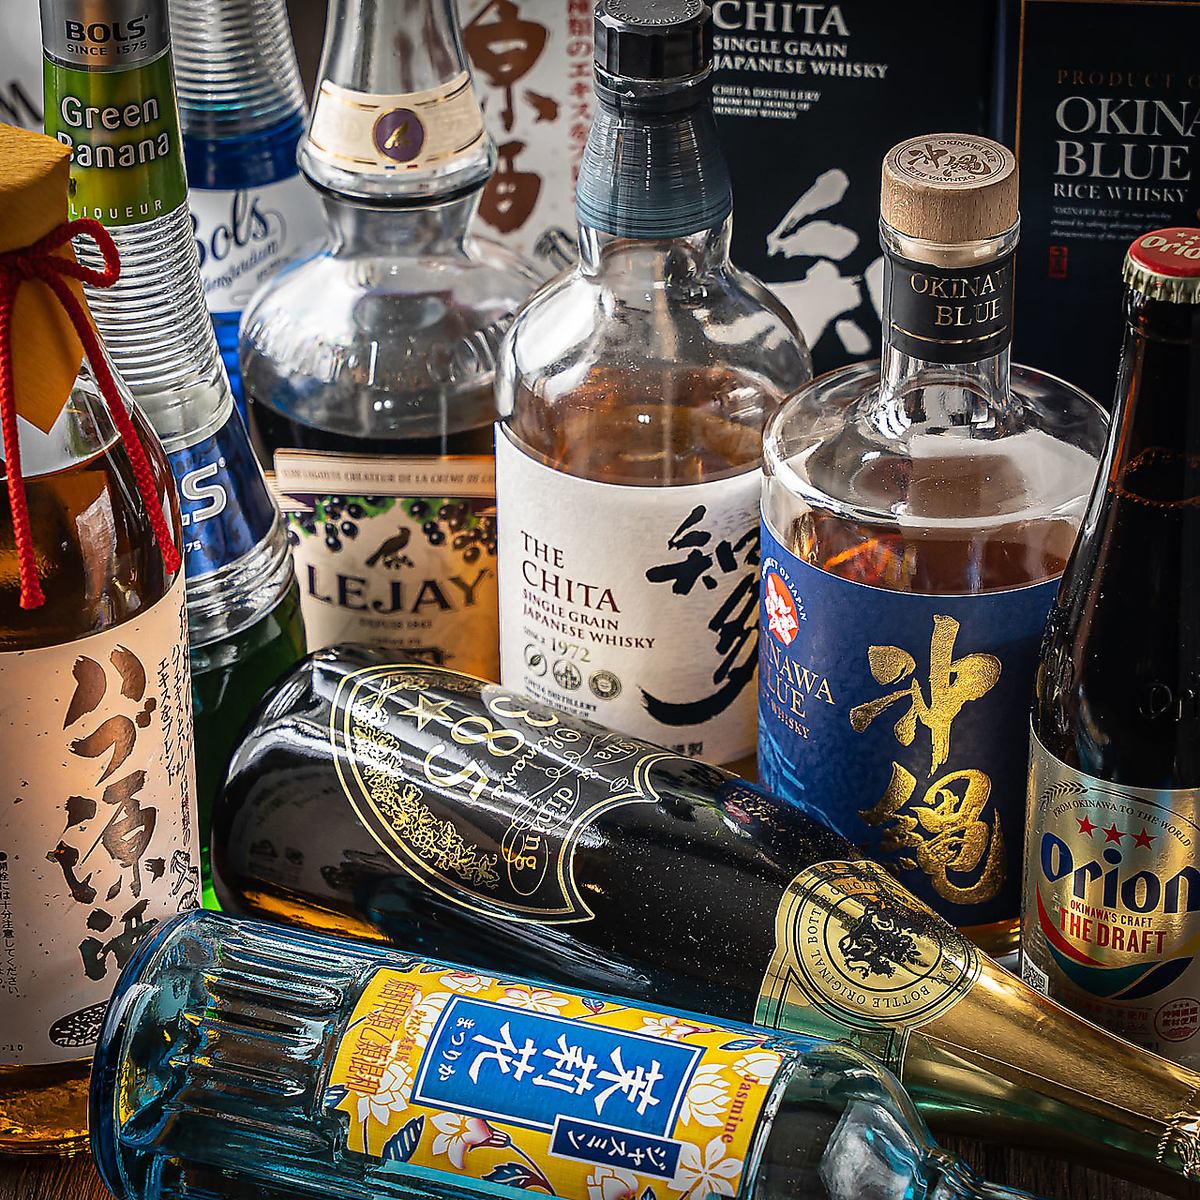 We have all-you-can-drink plans available from 2,000 yen/2 hours. Unlimited drinks available too!